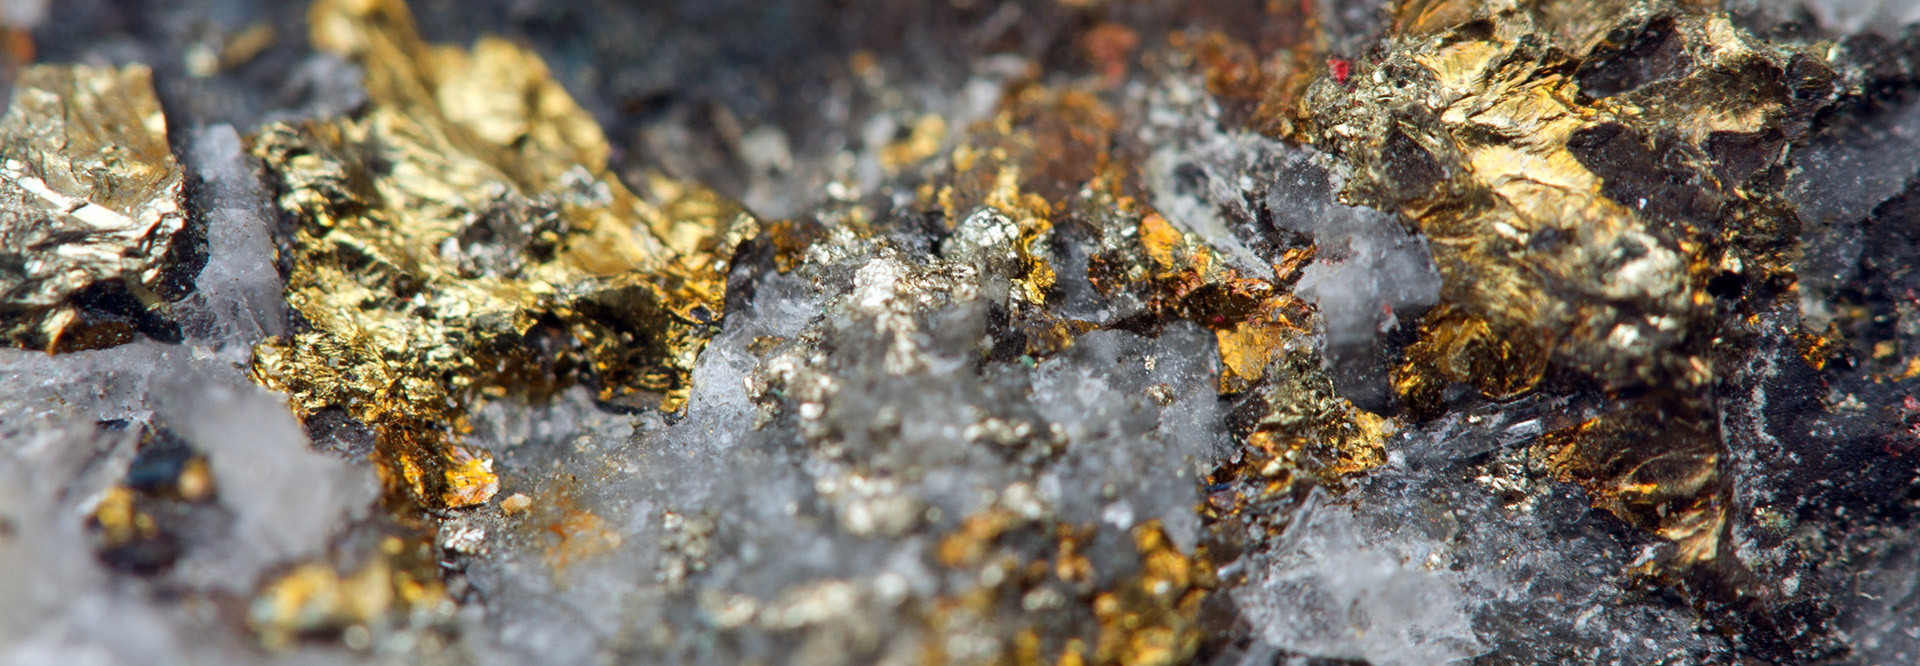 Close-Up of minerals (photo).